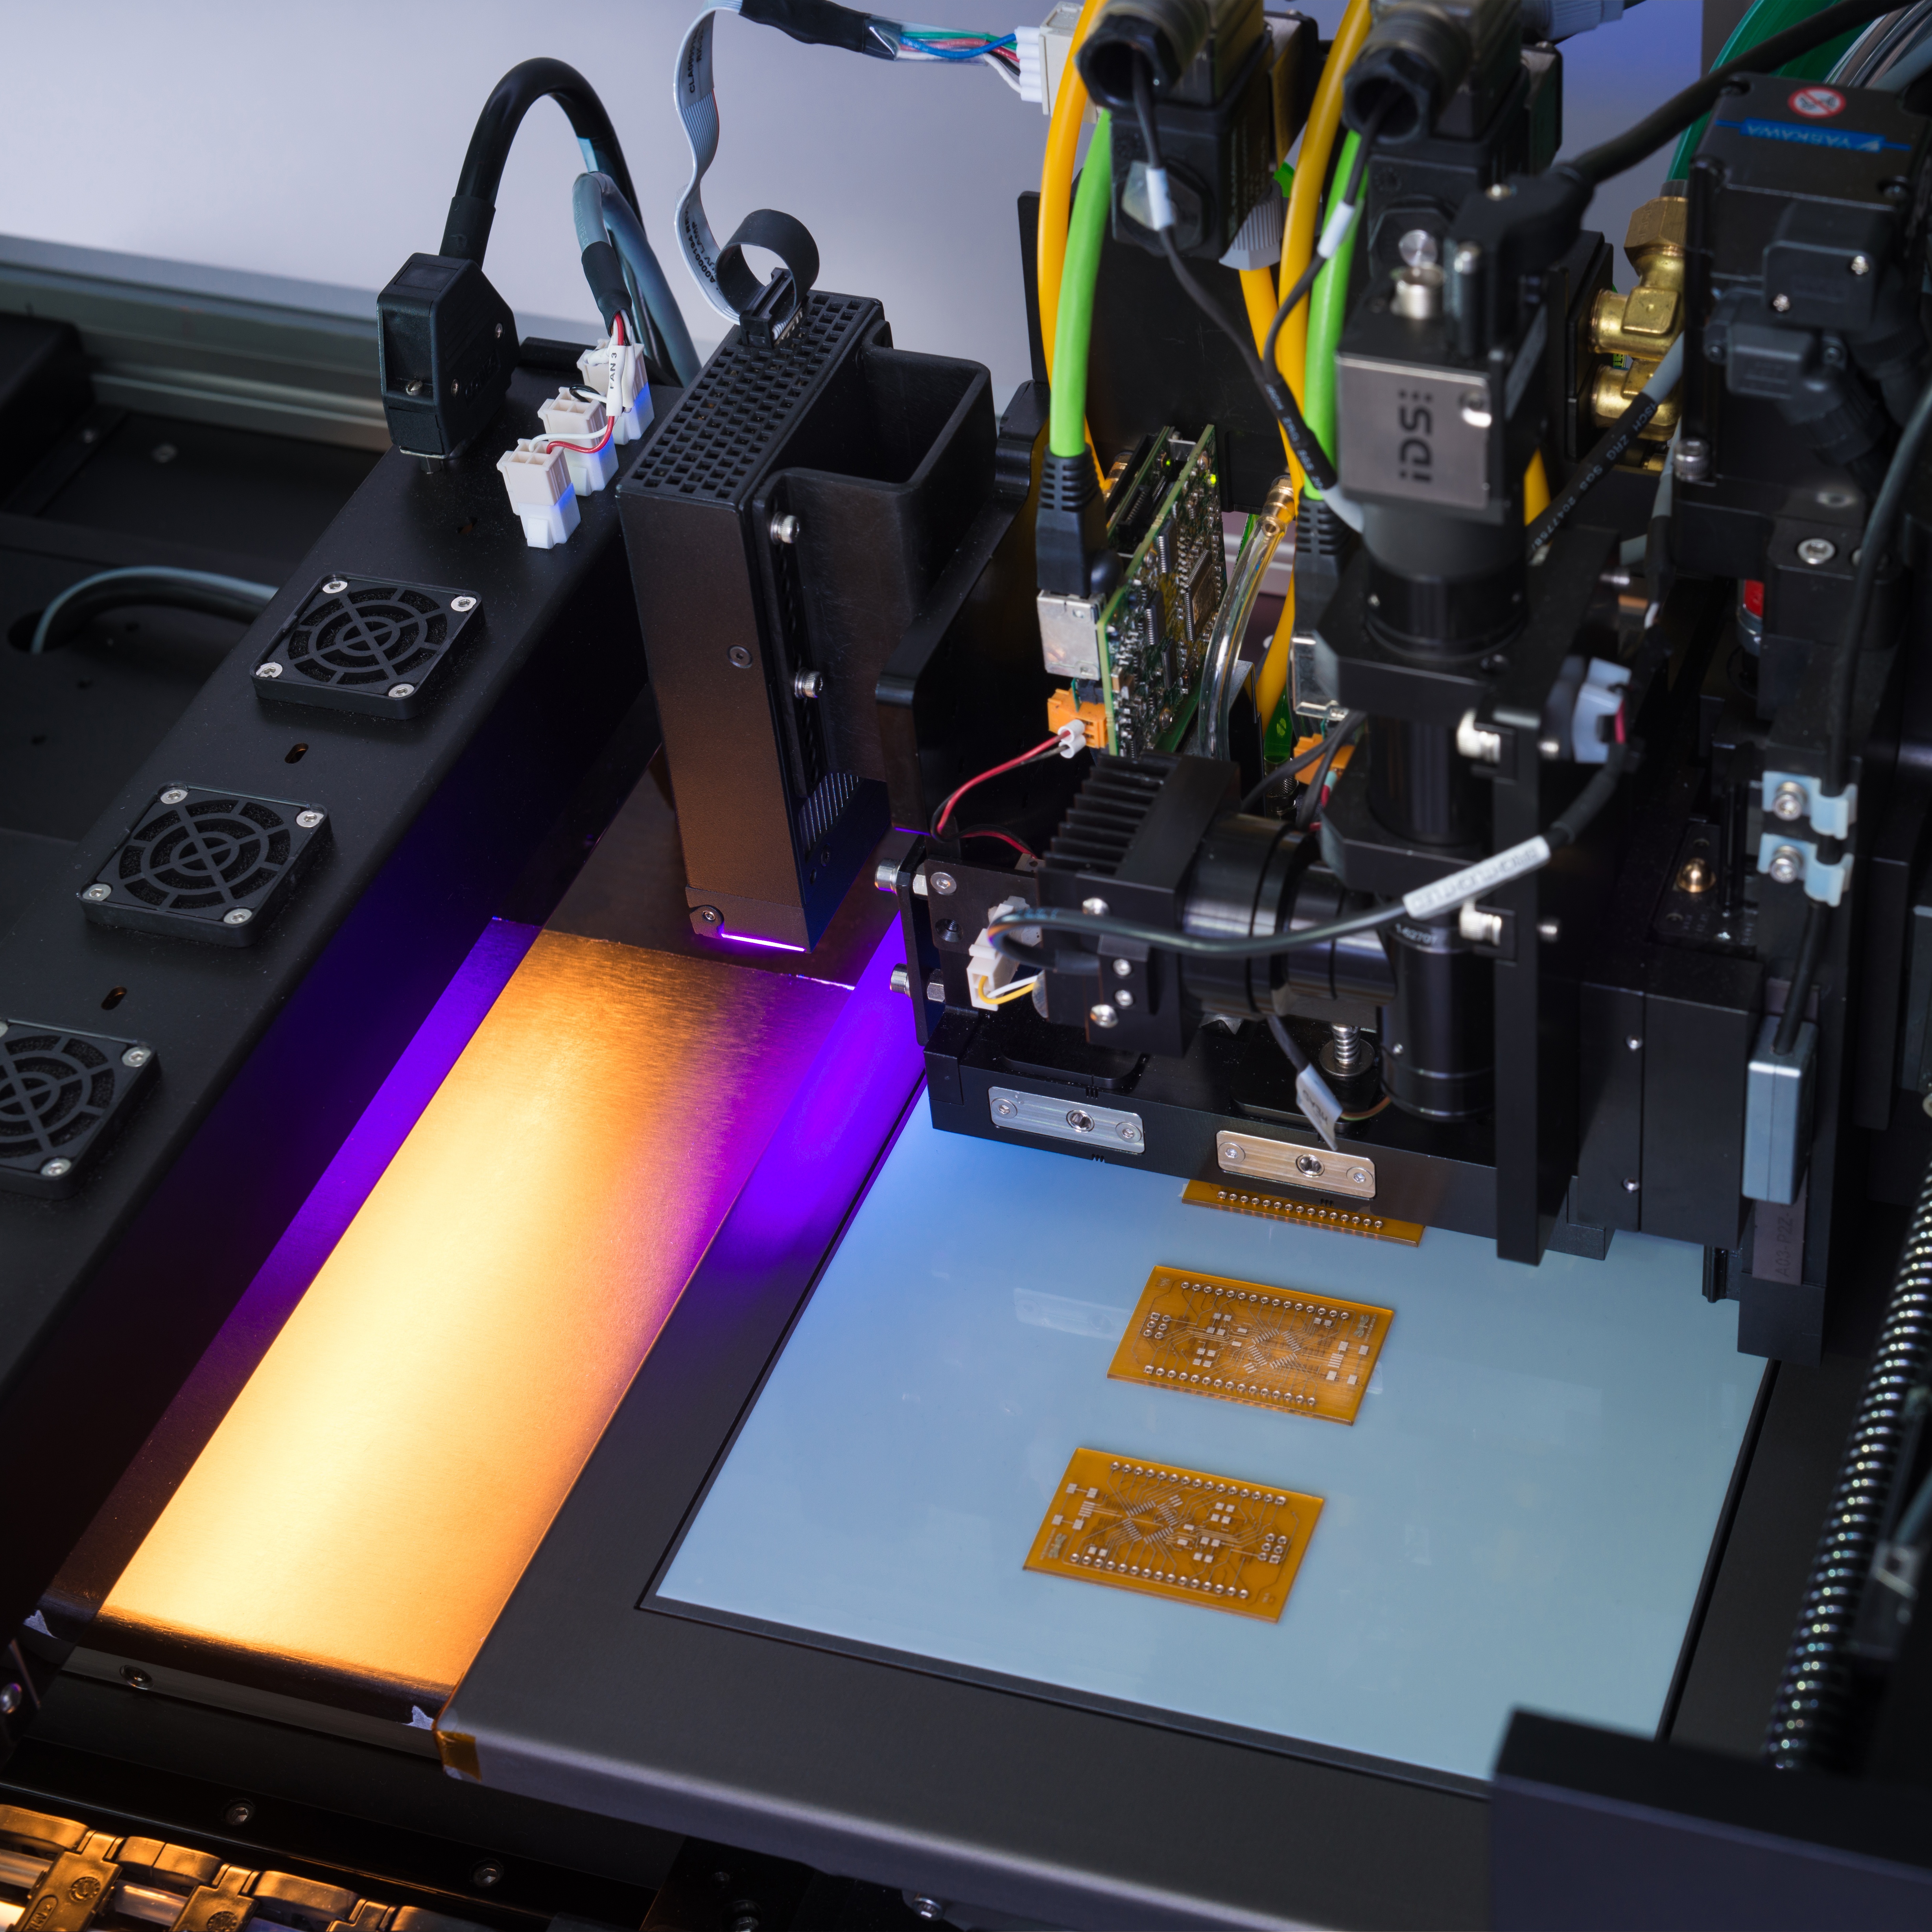 The DragonFly Pro uses inkjet additive manufacturing technology to 3D print PCBs.